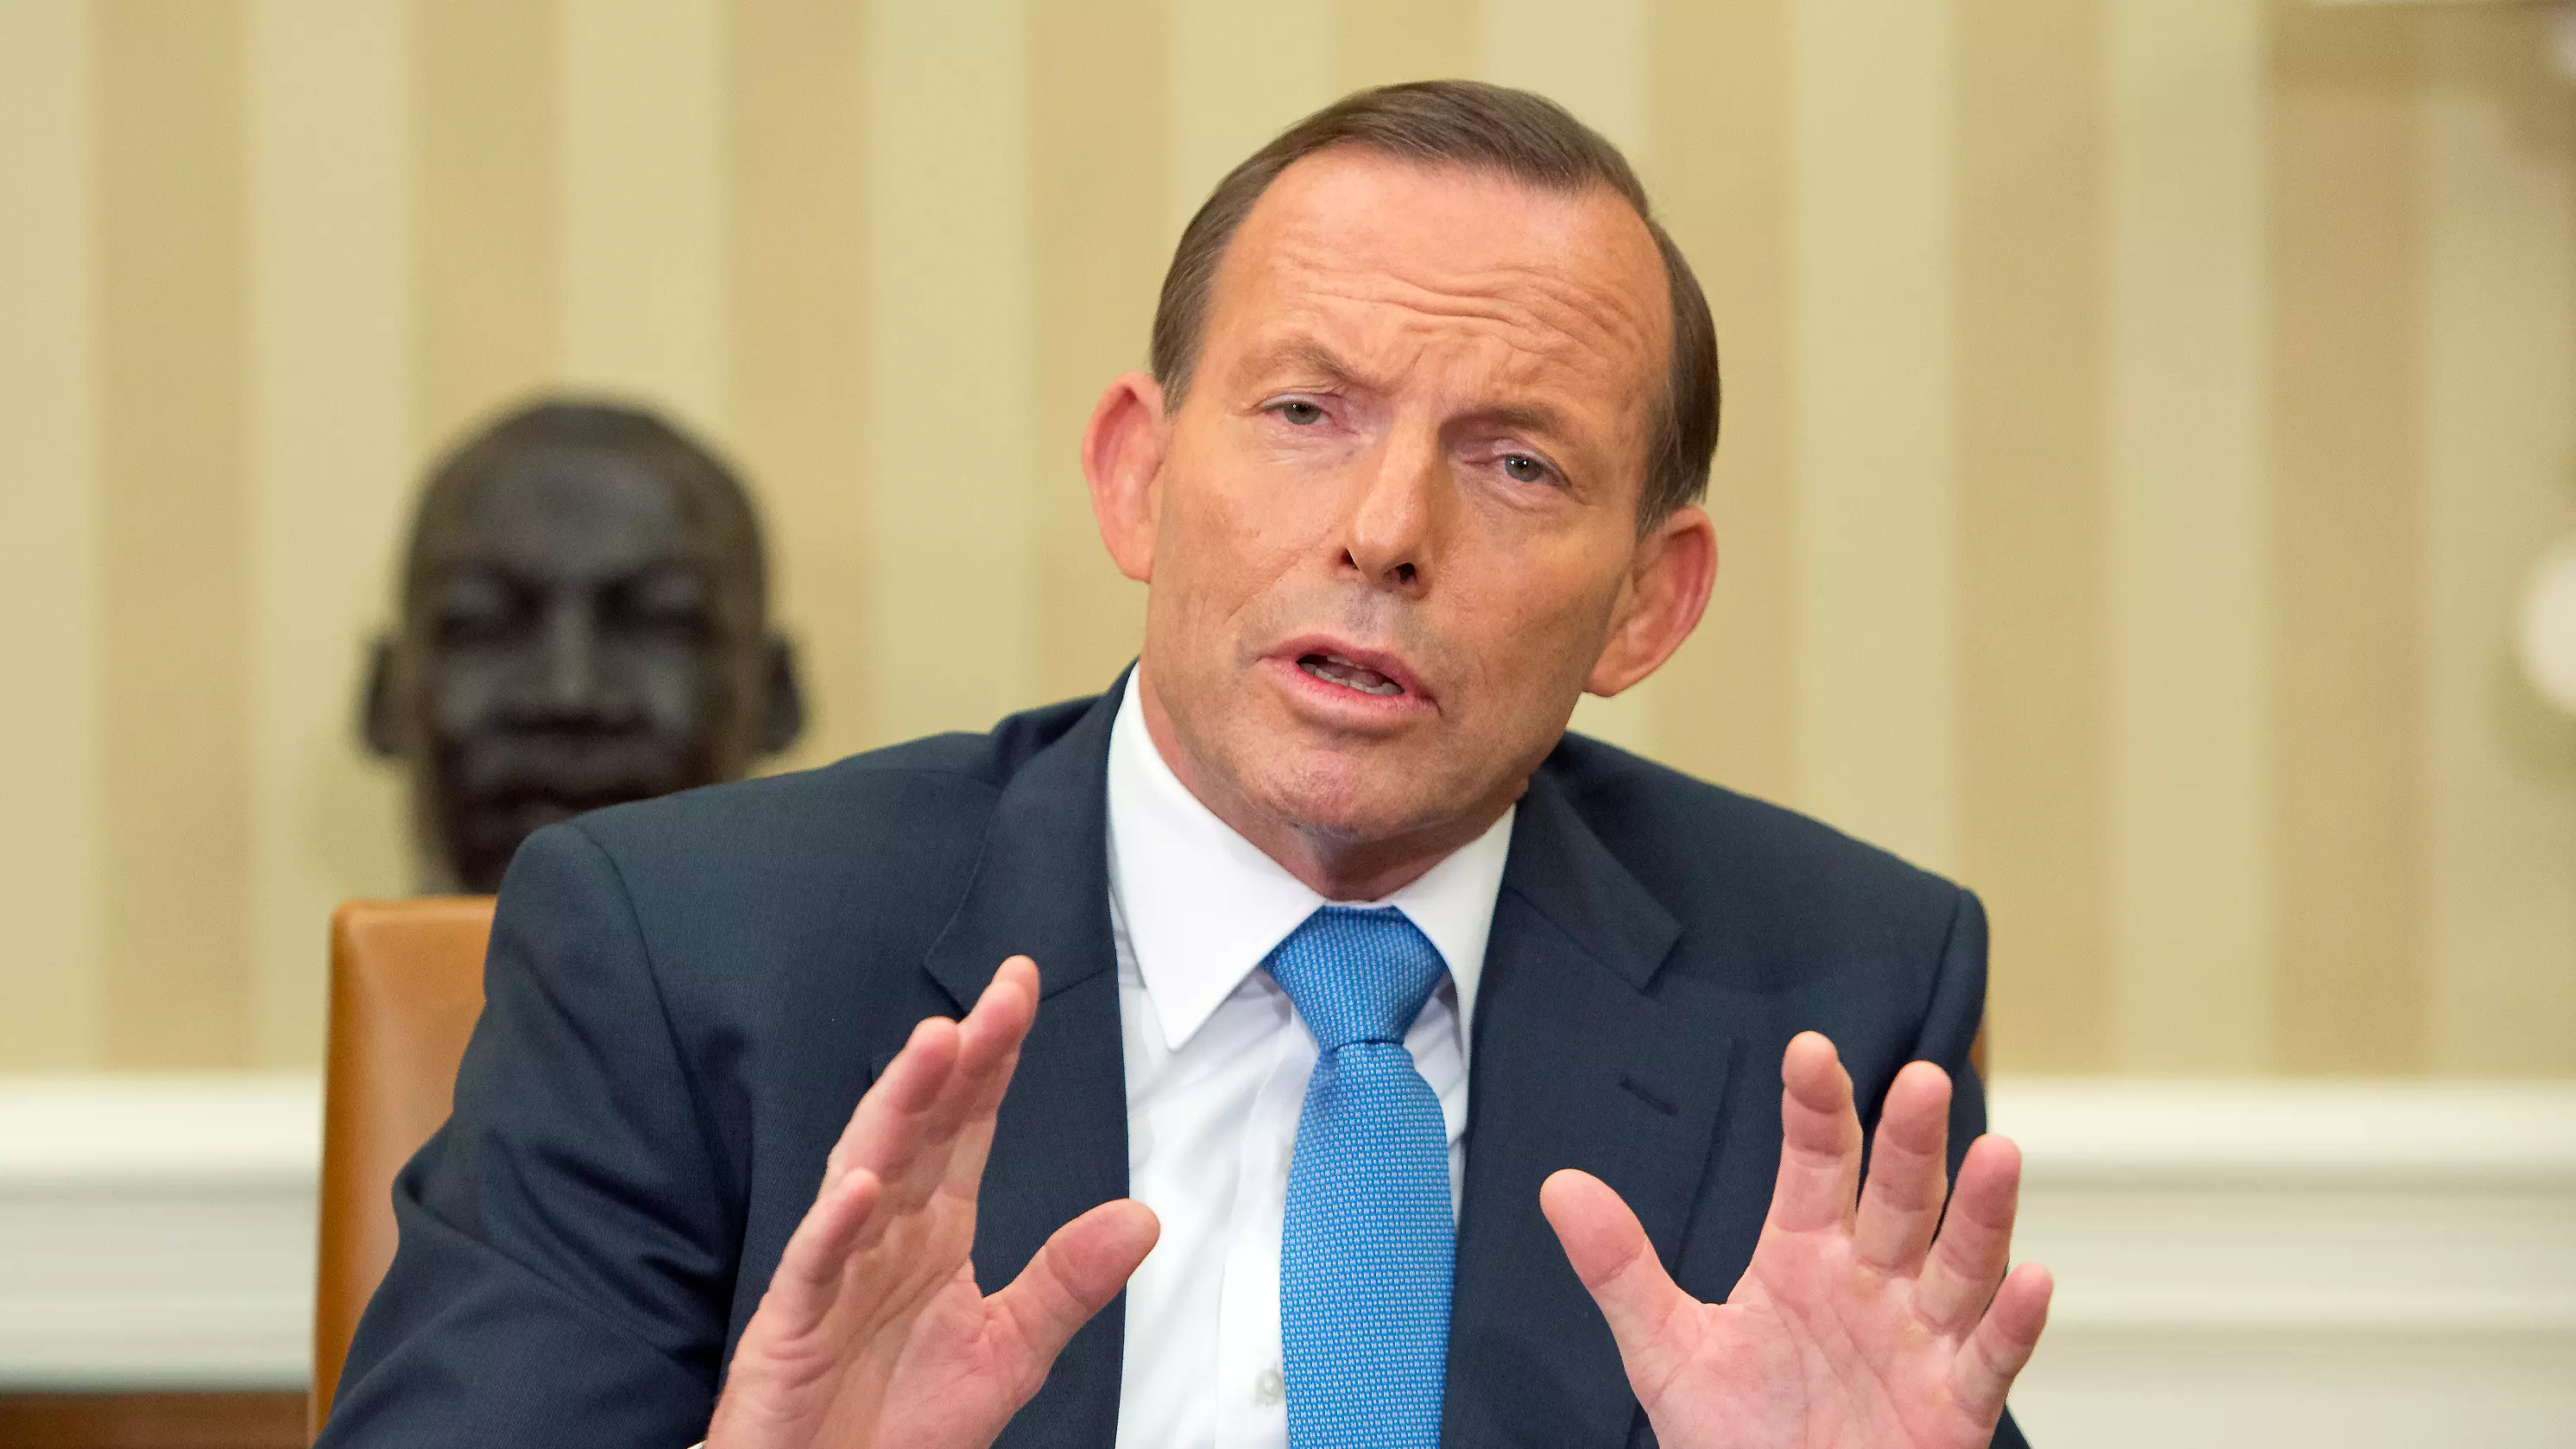 Police Investigating After Book Filled With Poo Dumped On Tony Abbott's Office